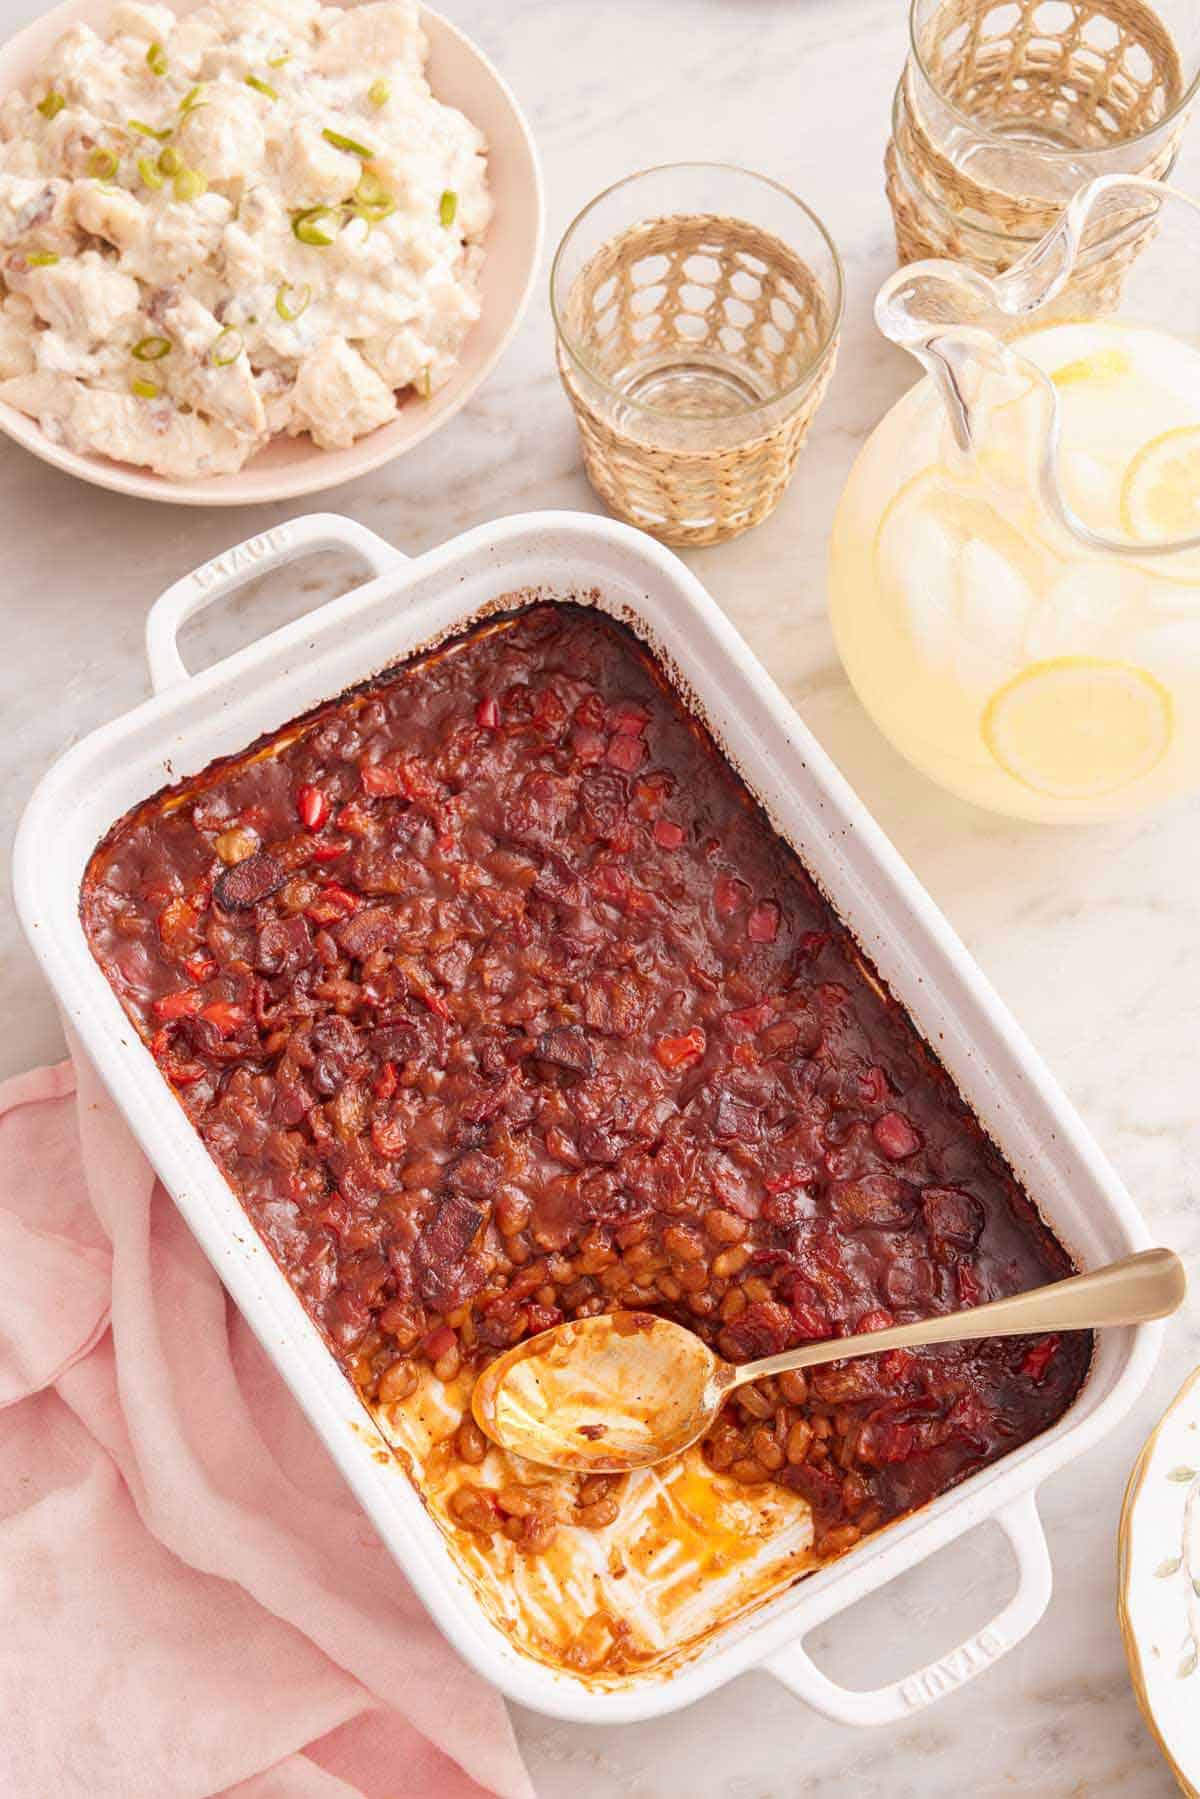 Overhead view of a baking dish with baked beans with a serving scooped out with the spoon still inside. Lemonade, glasses, and potato salad off to the side.